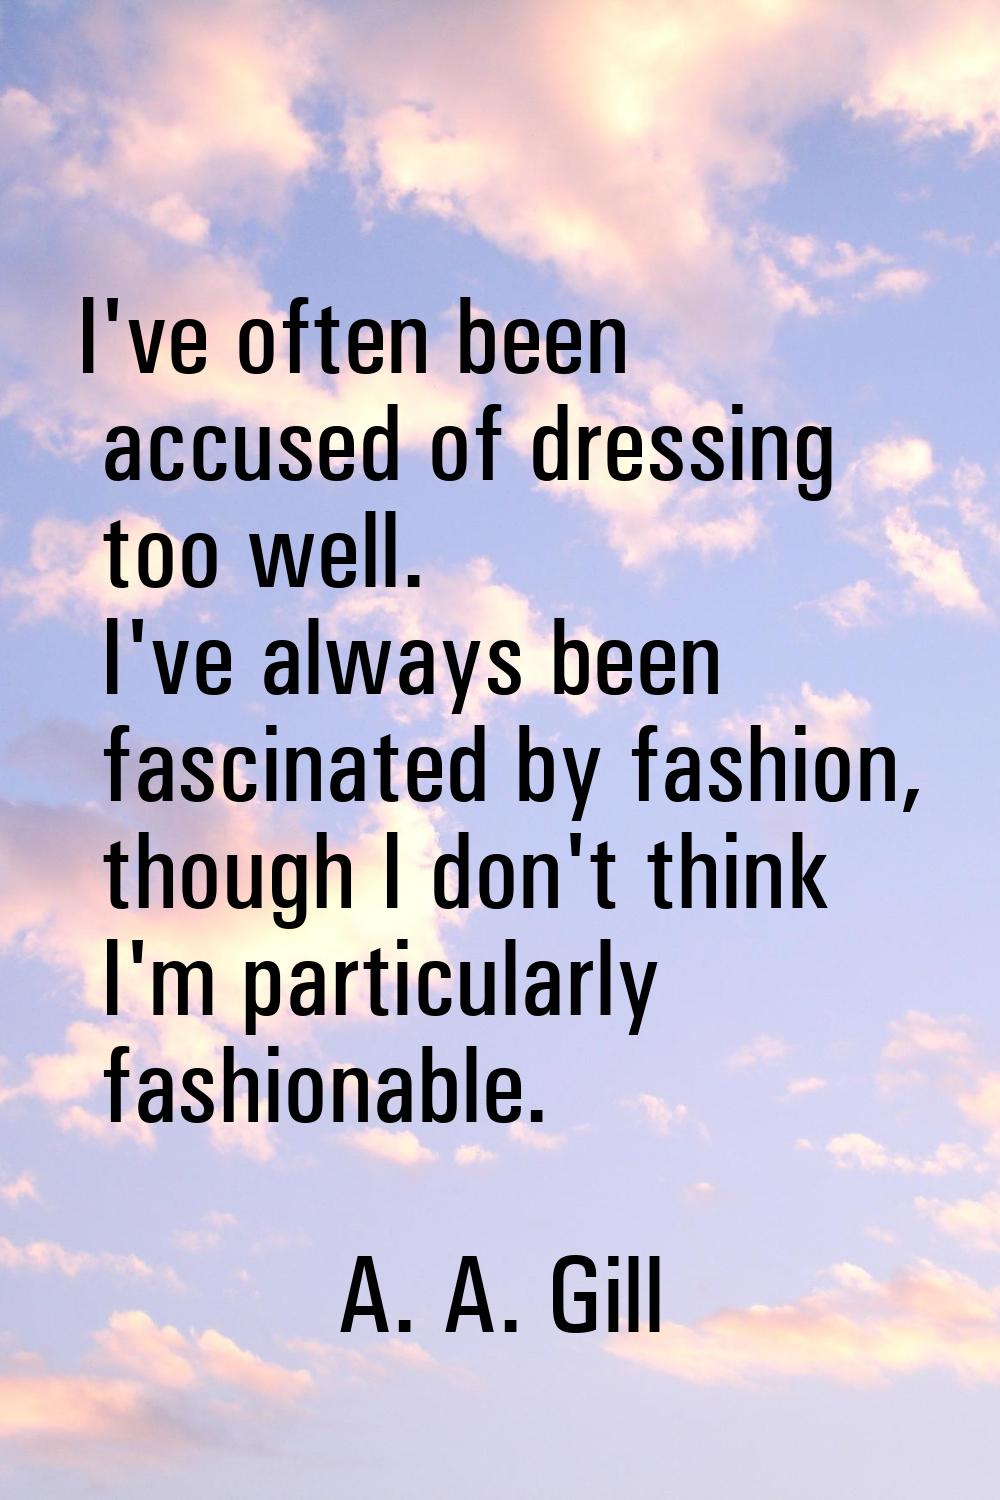 I've often been accused of dressing too well. I've always been fascinated by fashion, though I don'